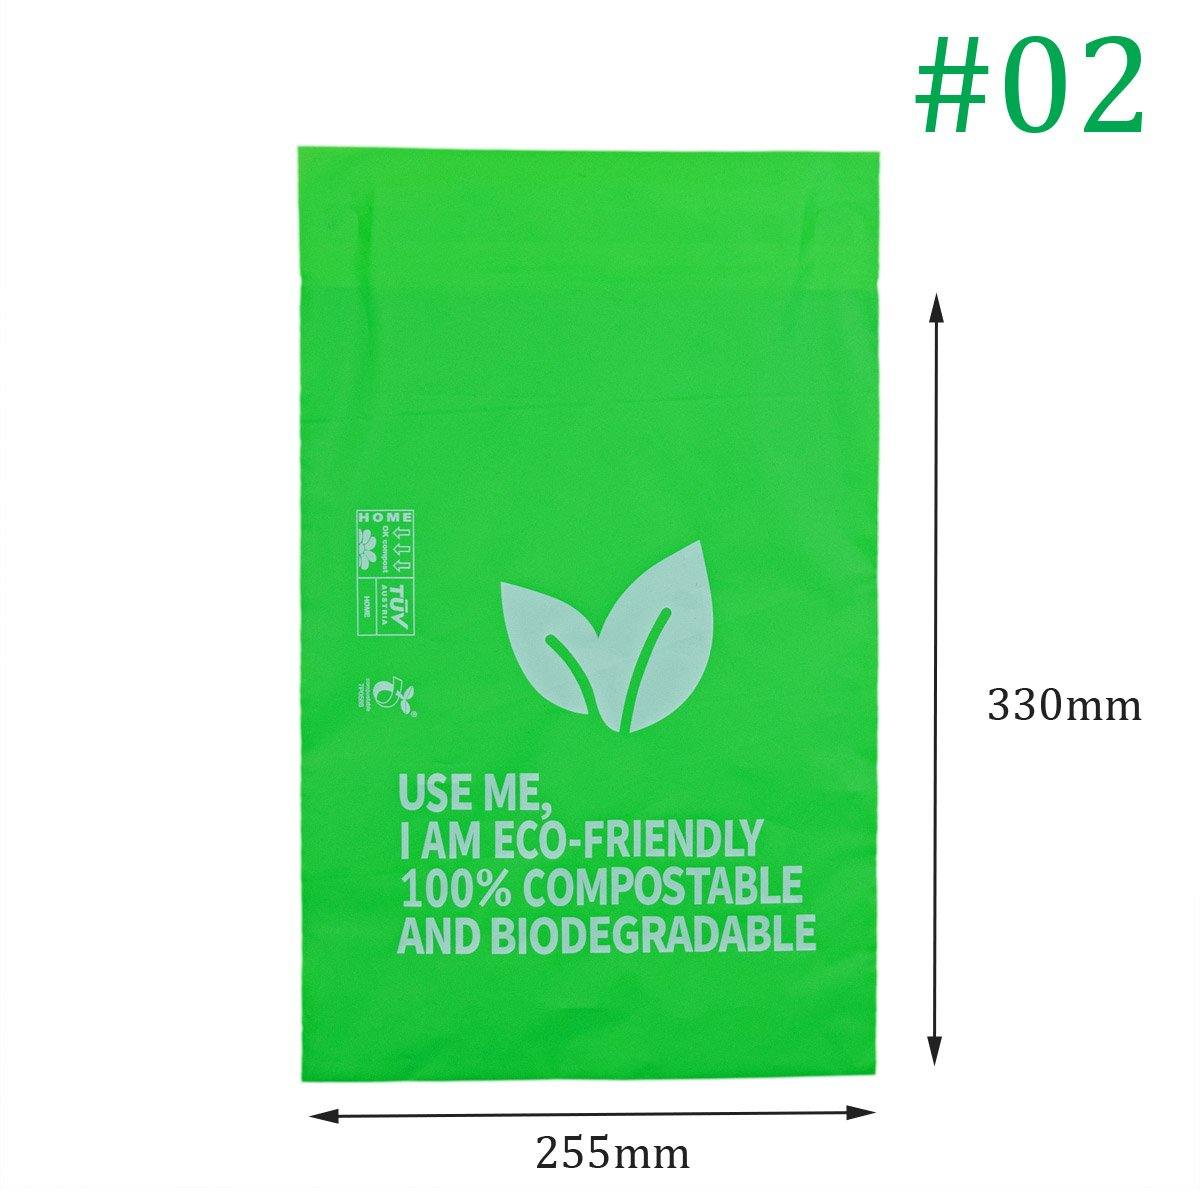 Compostable Mailer 02  255mm x 330mm